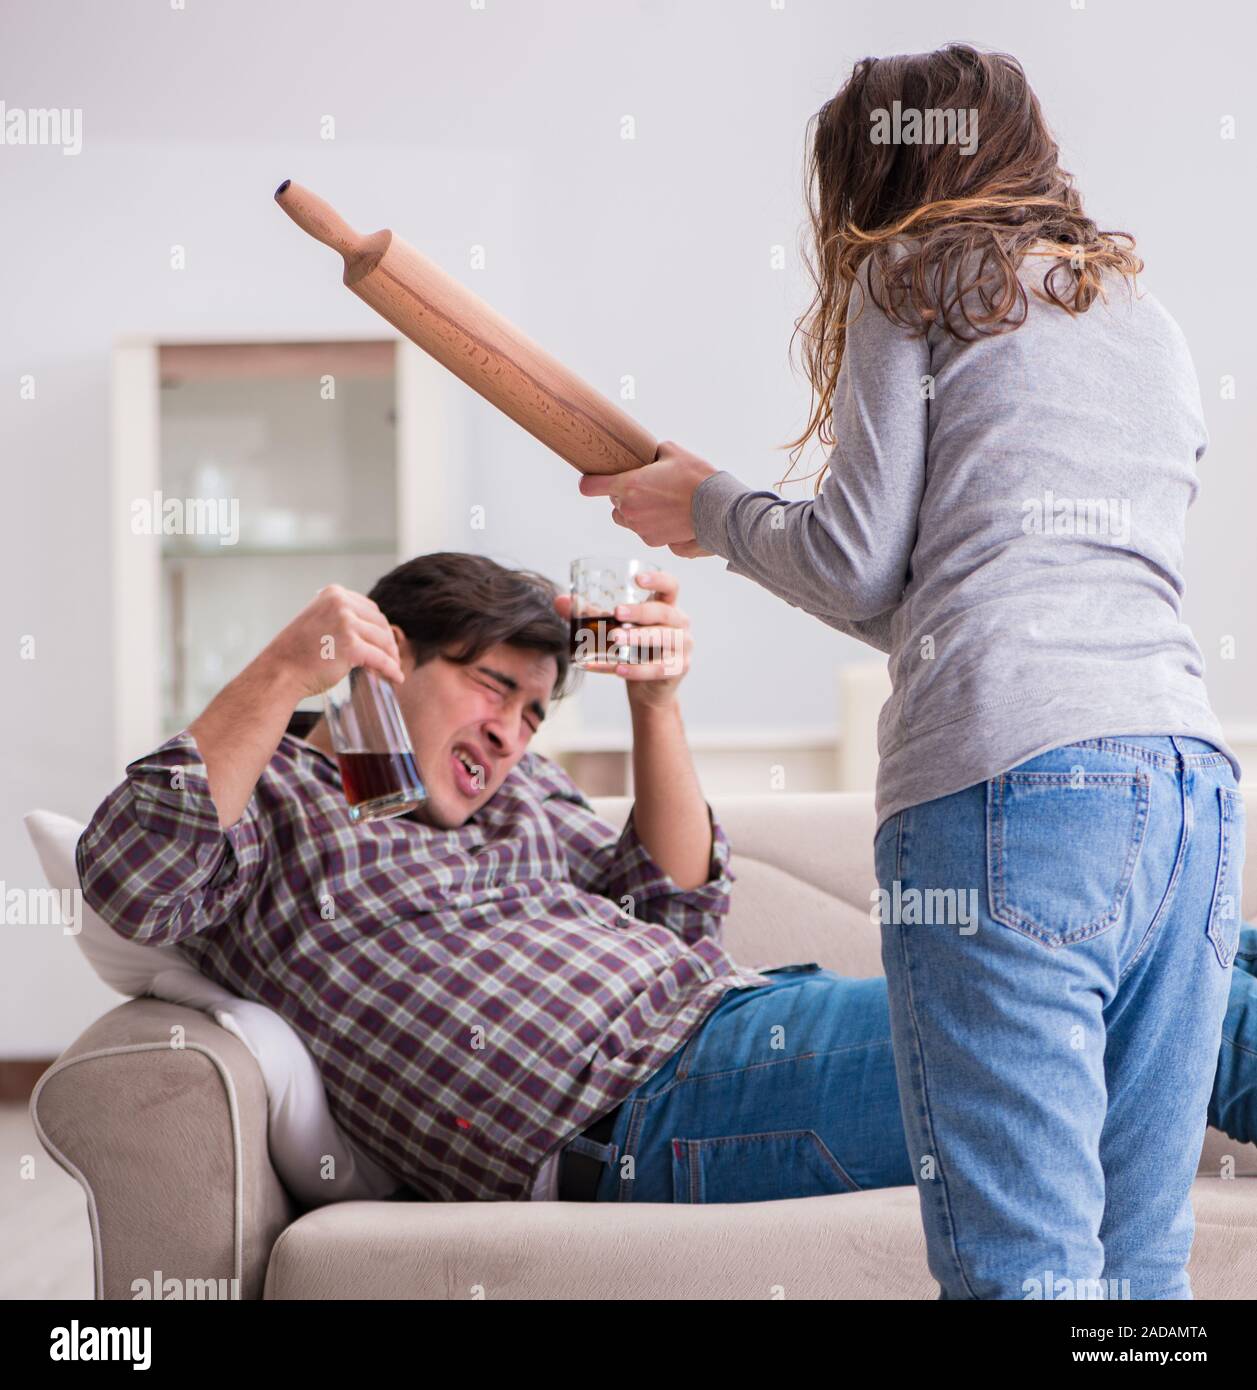 Drinking problem drunk husband man in a young family concept Stock Photo